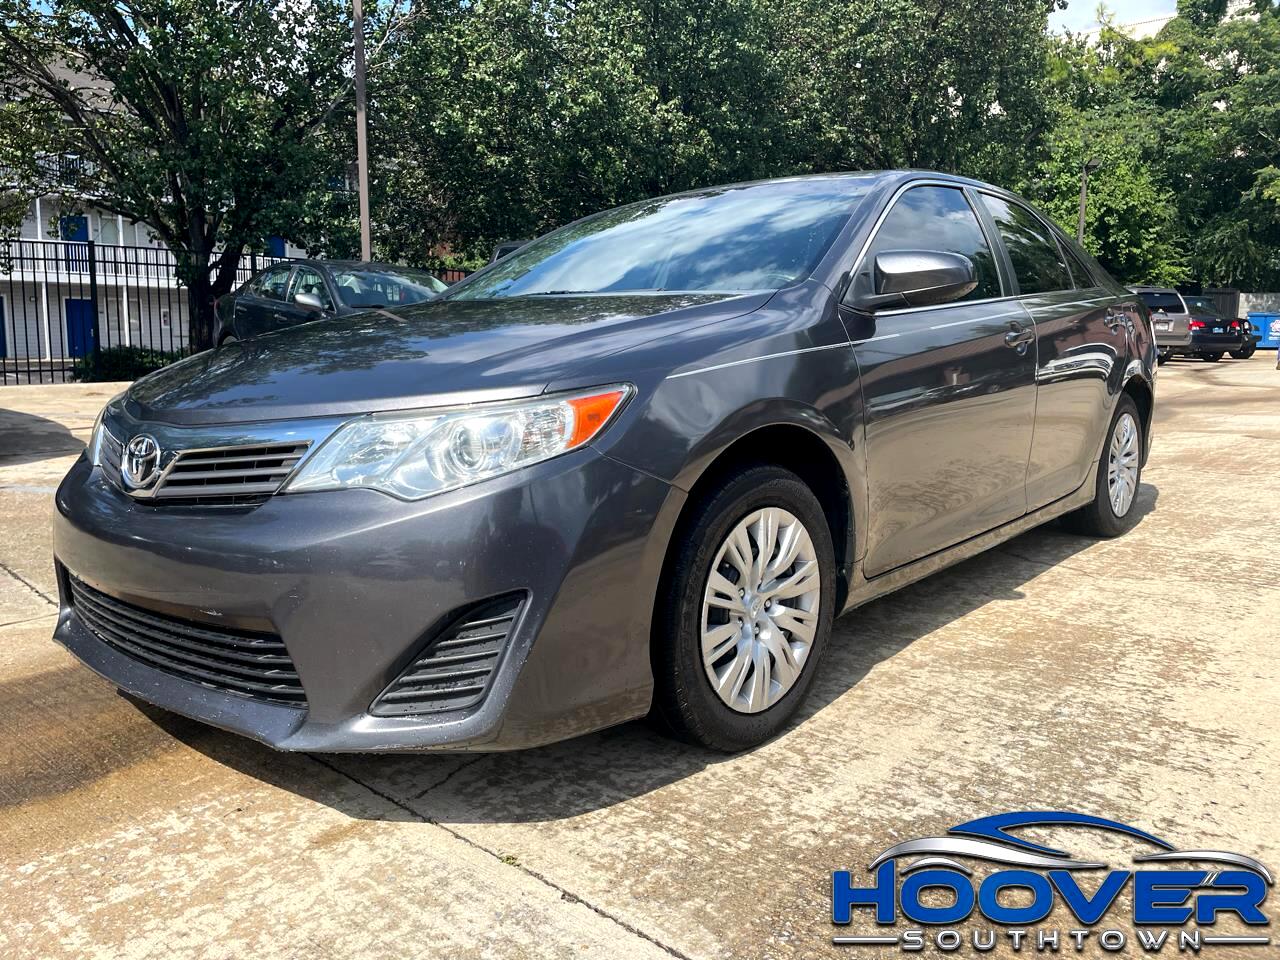 Toyota Camry LE 2013